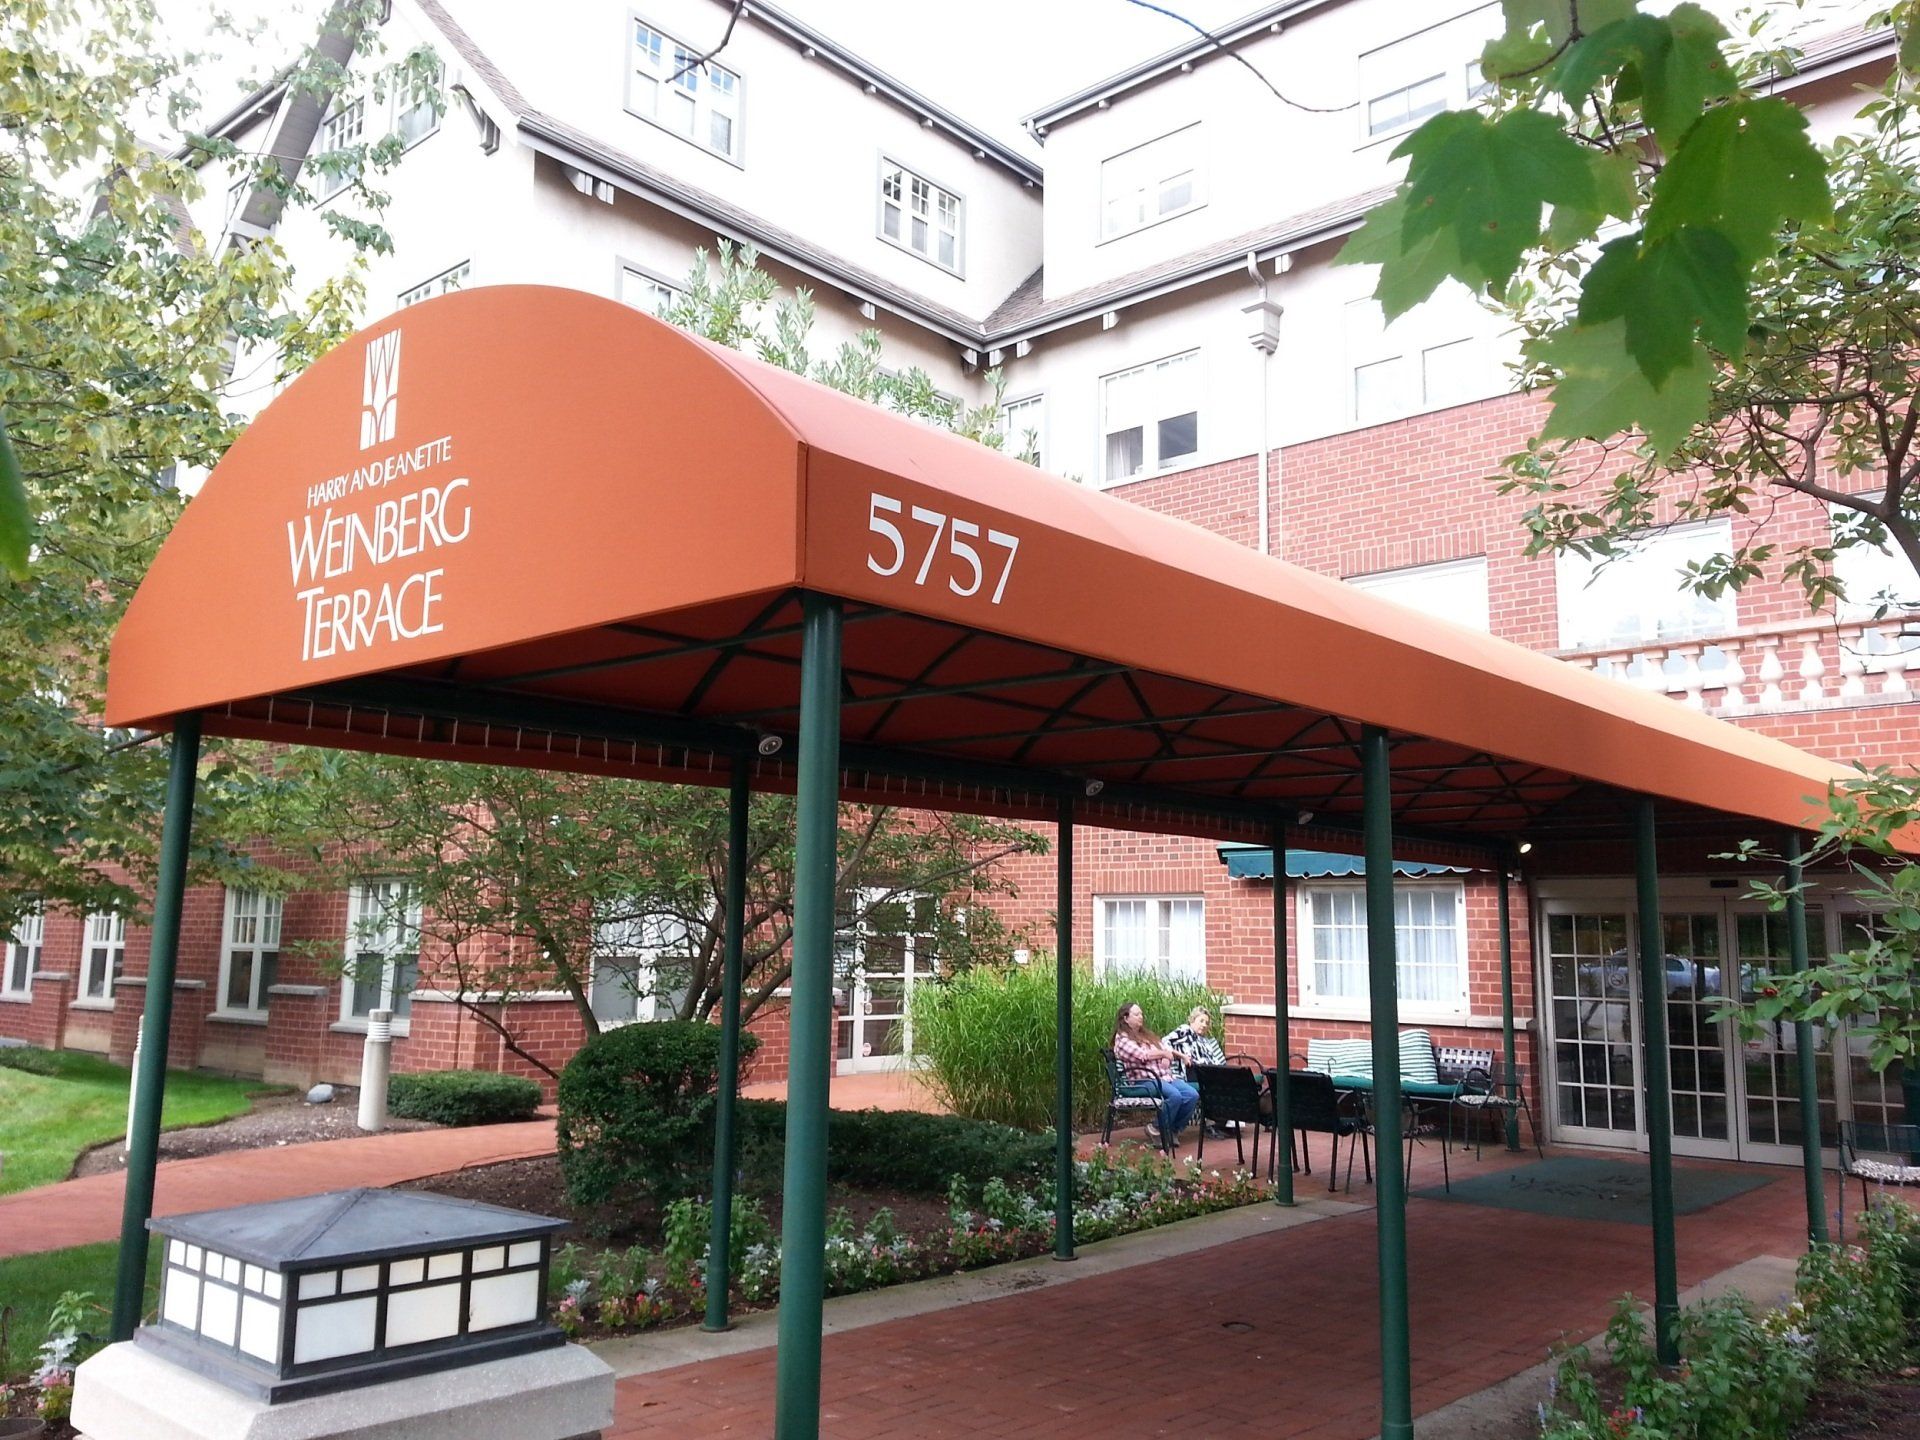 Commercial awning-51 — Custom awnings in Pittsburgh, PA